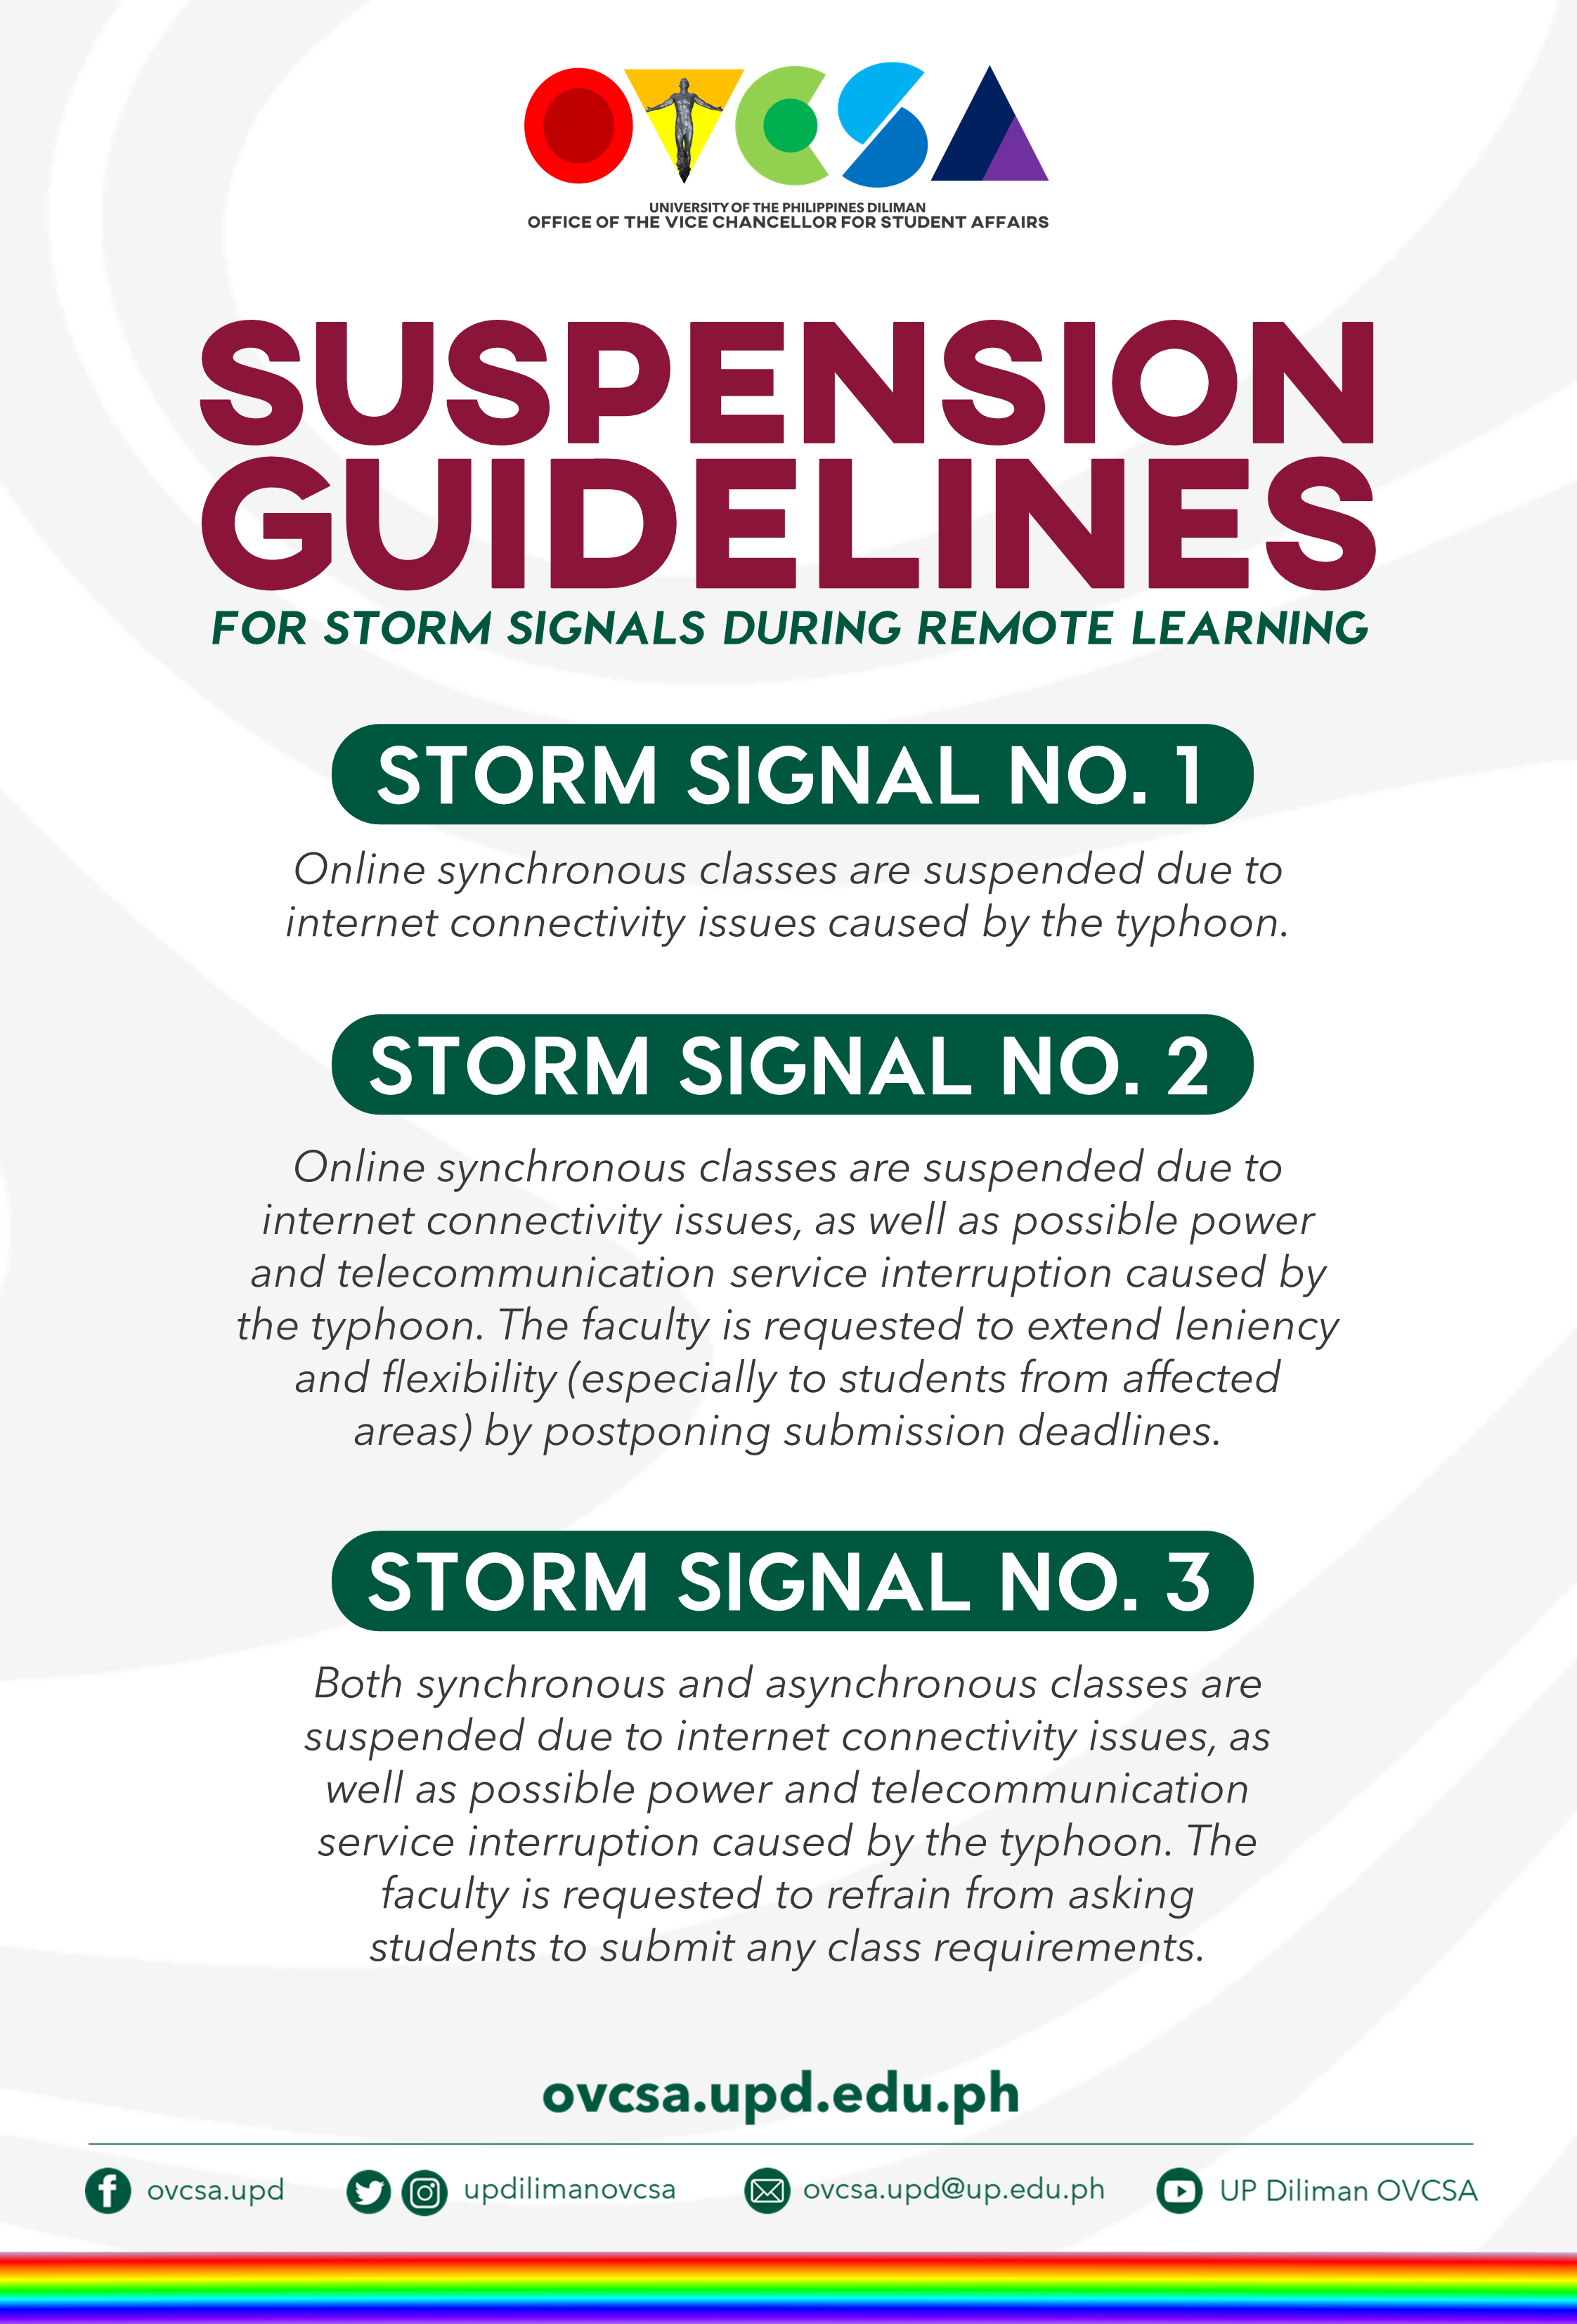 https://ovcsa.upd.edu.ph/ovcsa_wp/wp-content/uploads/2020/10/Suspension-Guidelines.png